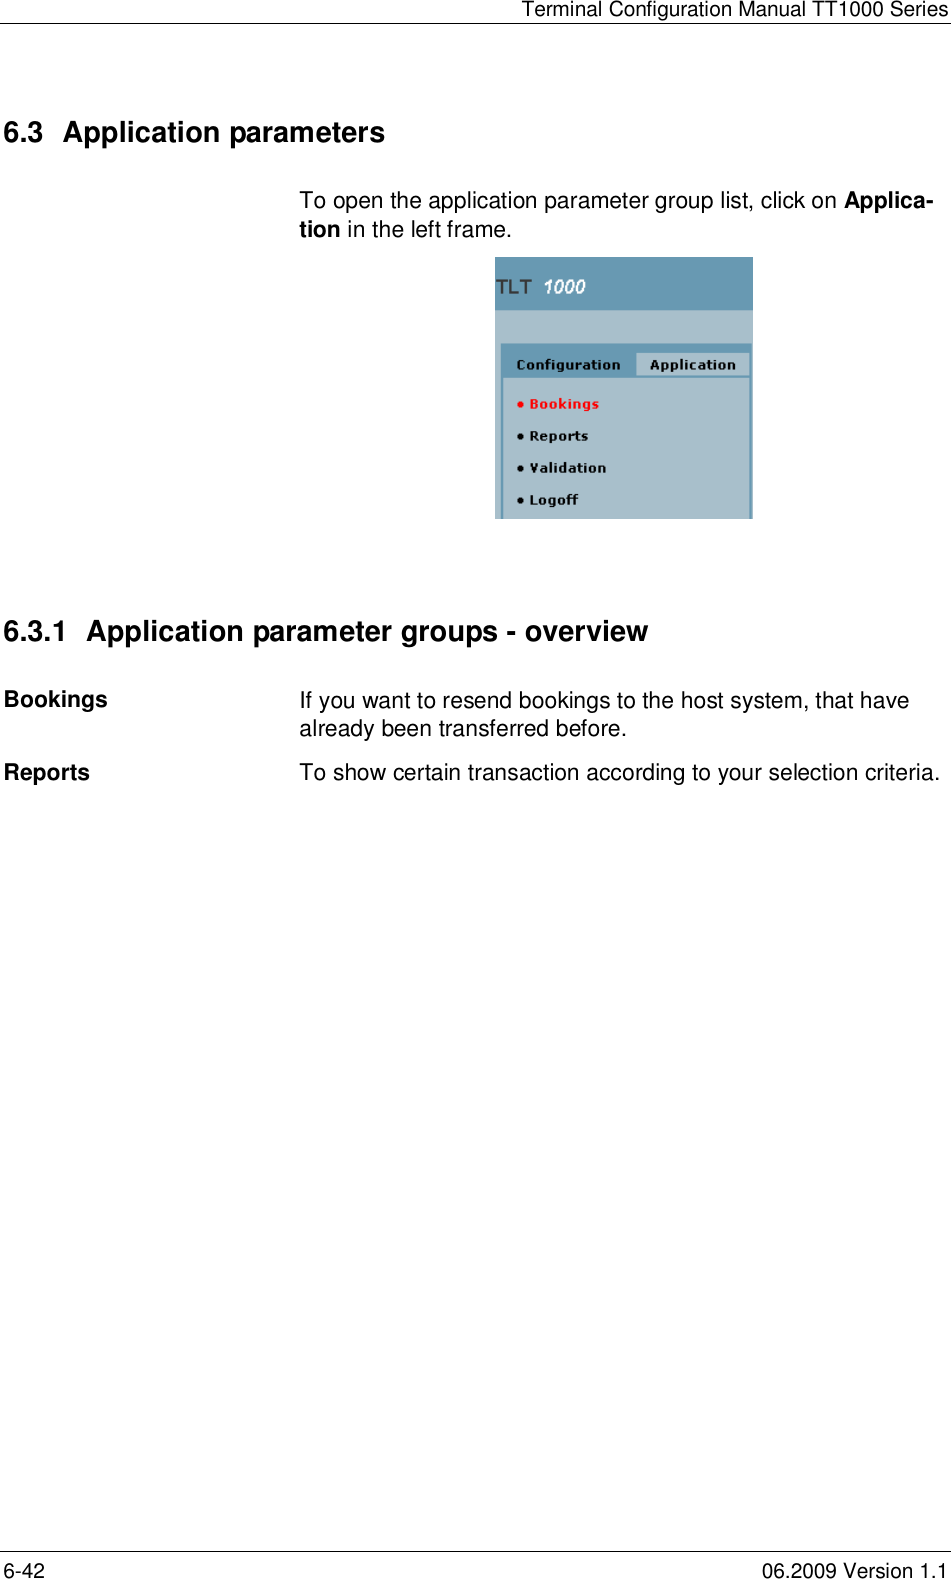 Terminal Configuration Manual TT1000 Series6-42 06.2009 Version 1.16.3  Application parametersTo open the application parameter group list, click on Applica-tion in the left frame.6.3.1  Application parameter groups - overviewBookings If you want to resend bookings to the host system, that havealready been transferred before.Reports To show certain transaction according to your selection criteria.